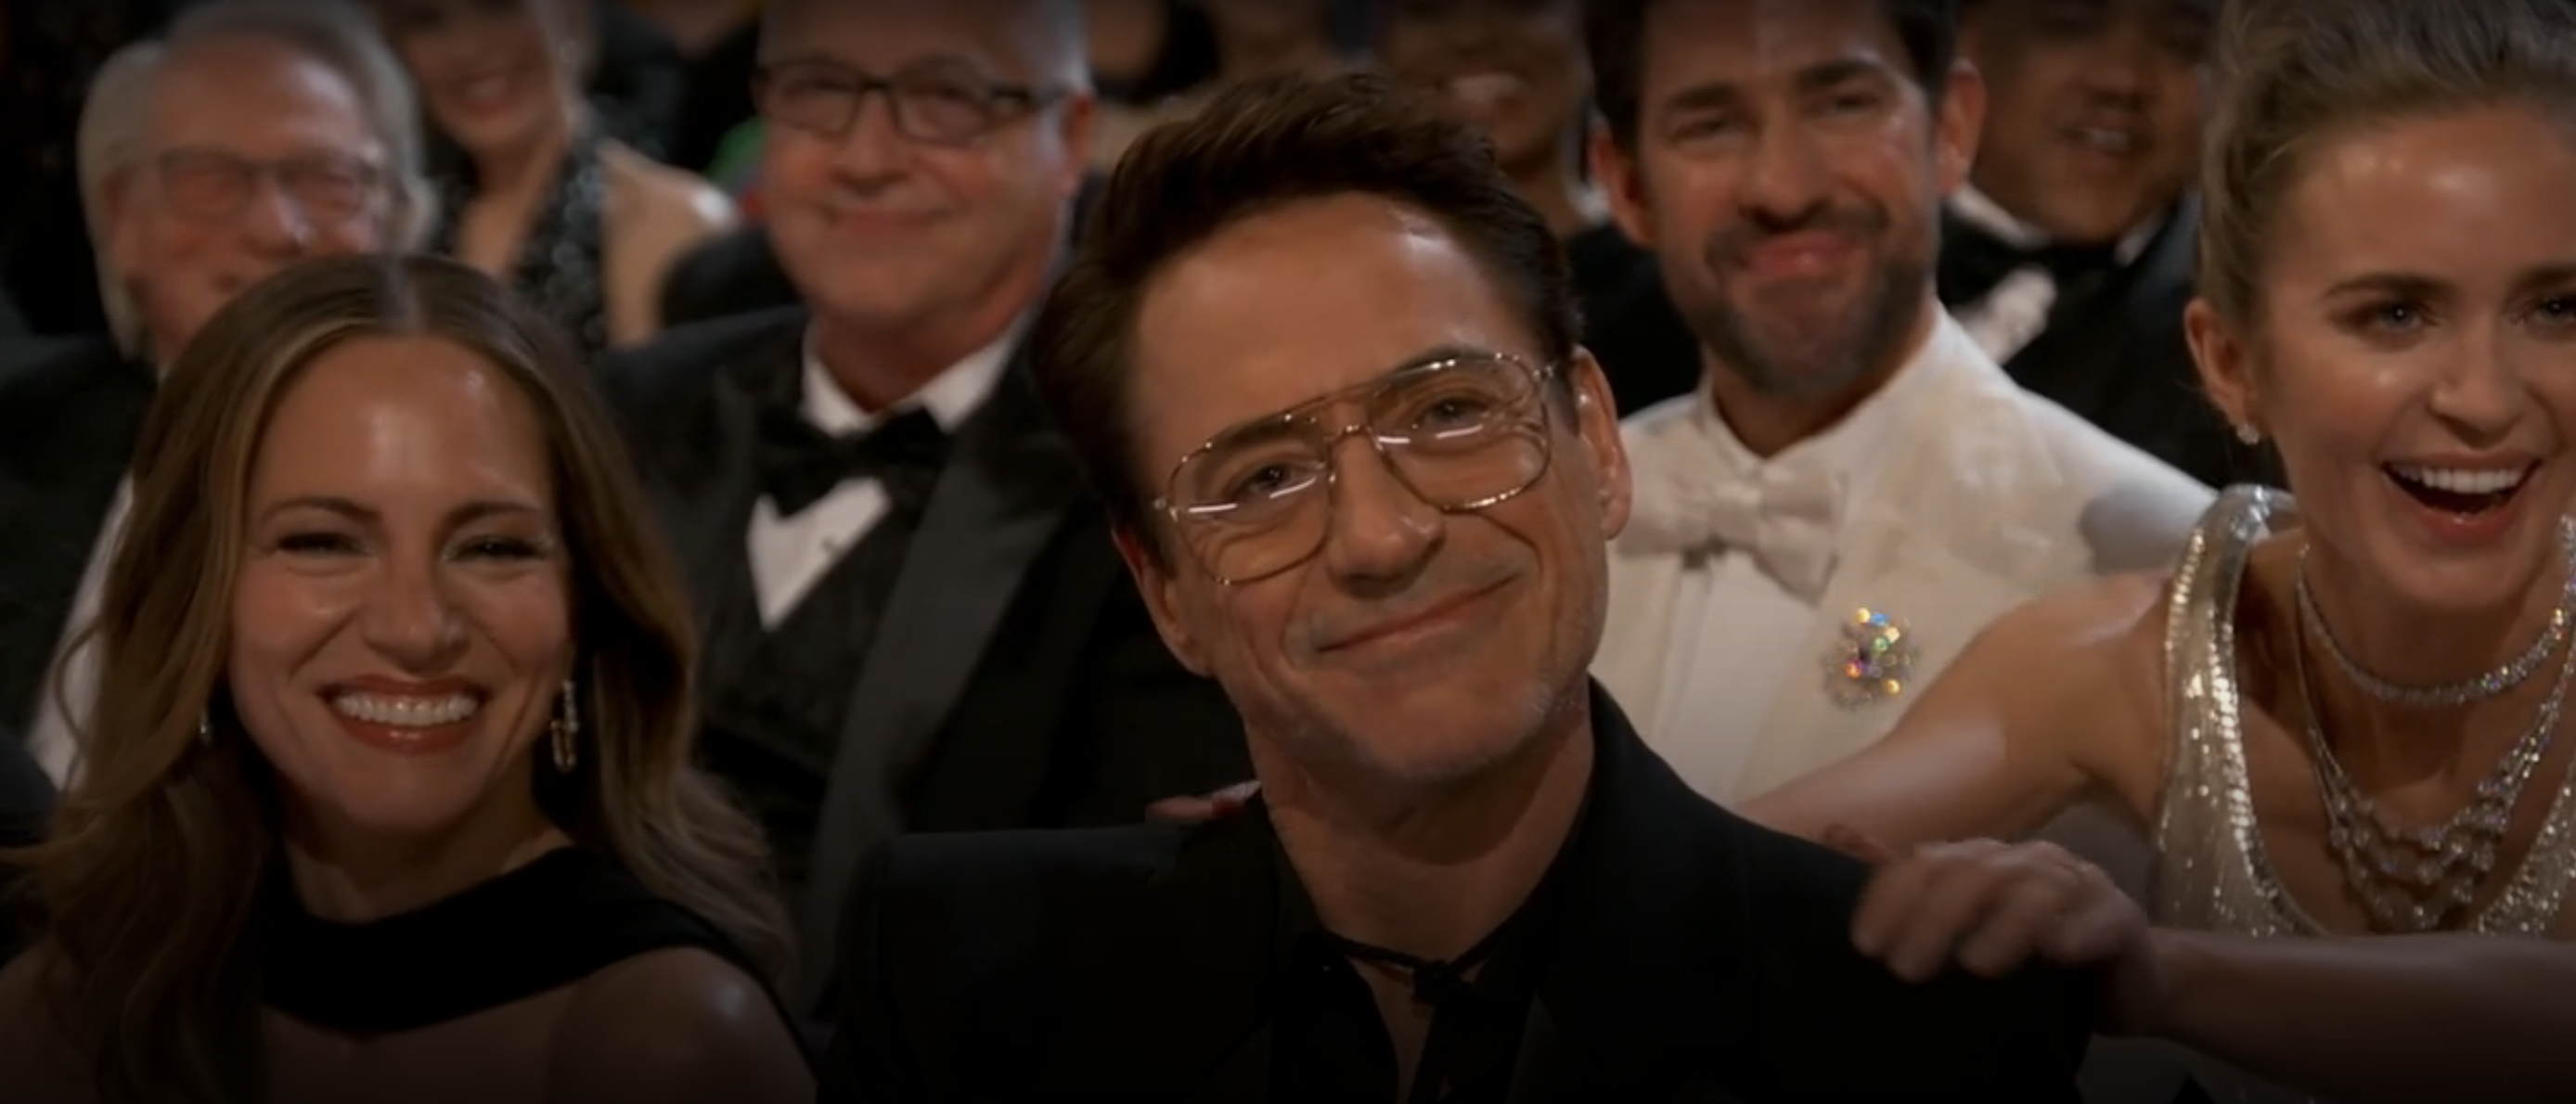 Robert Downey Jr. in the audience at the Oscars